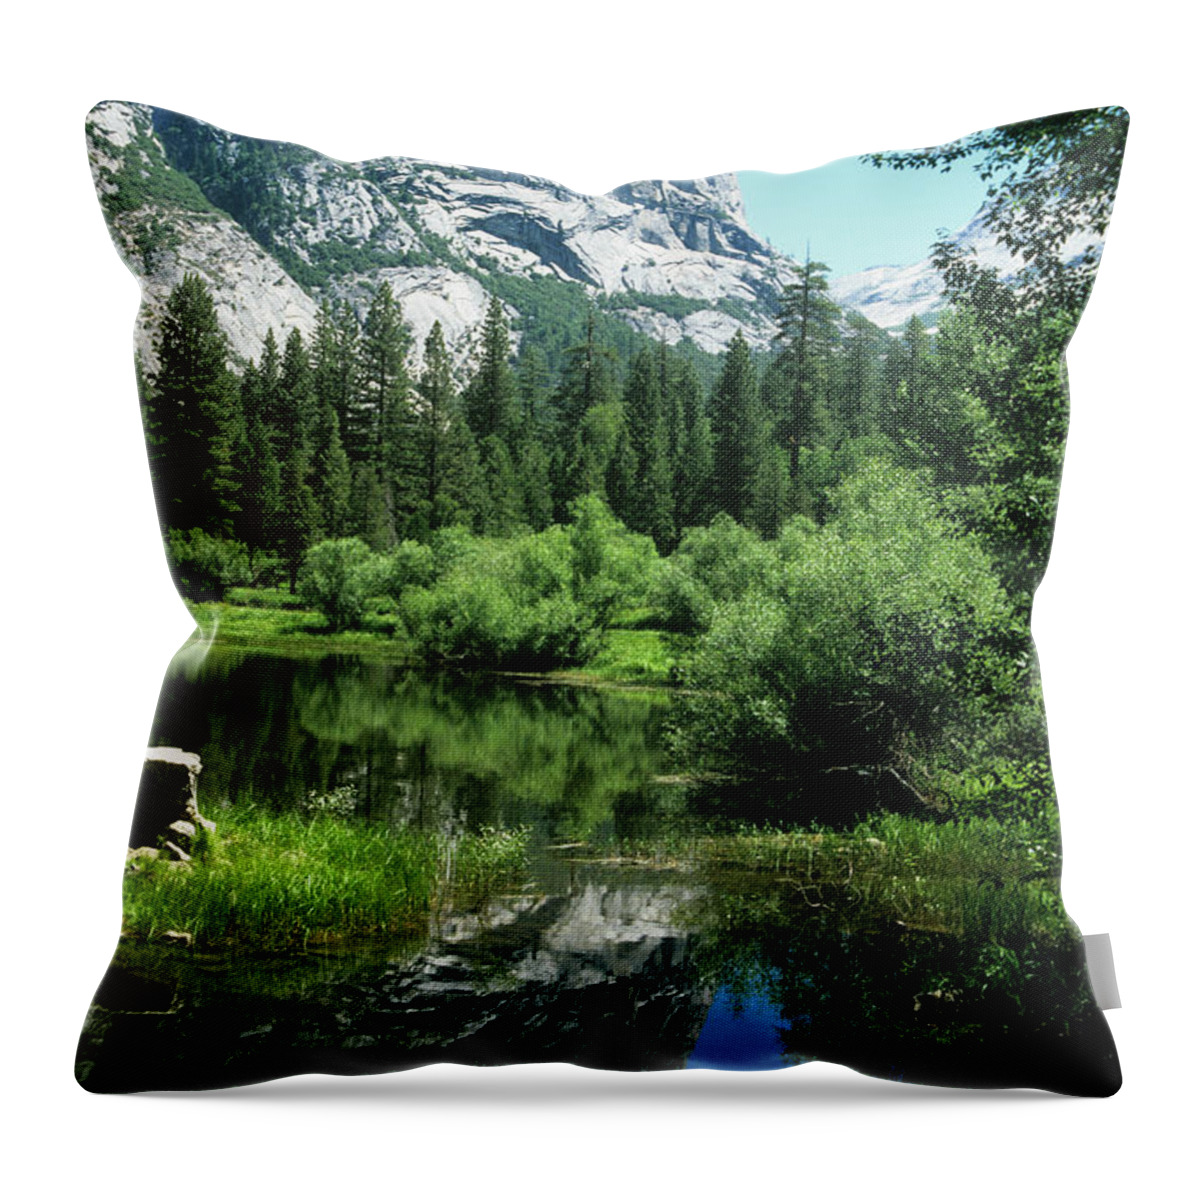 Scenics Throw Pillow featuring the photograph Mount Watkins And Mirror Lake by Moodboard